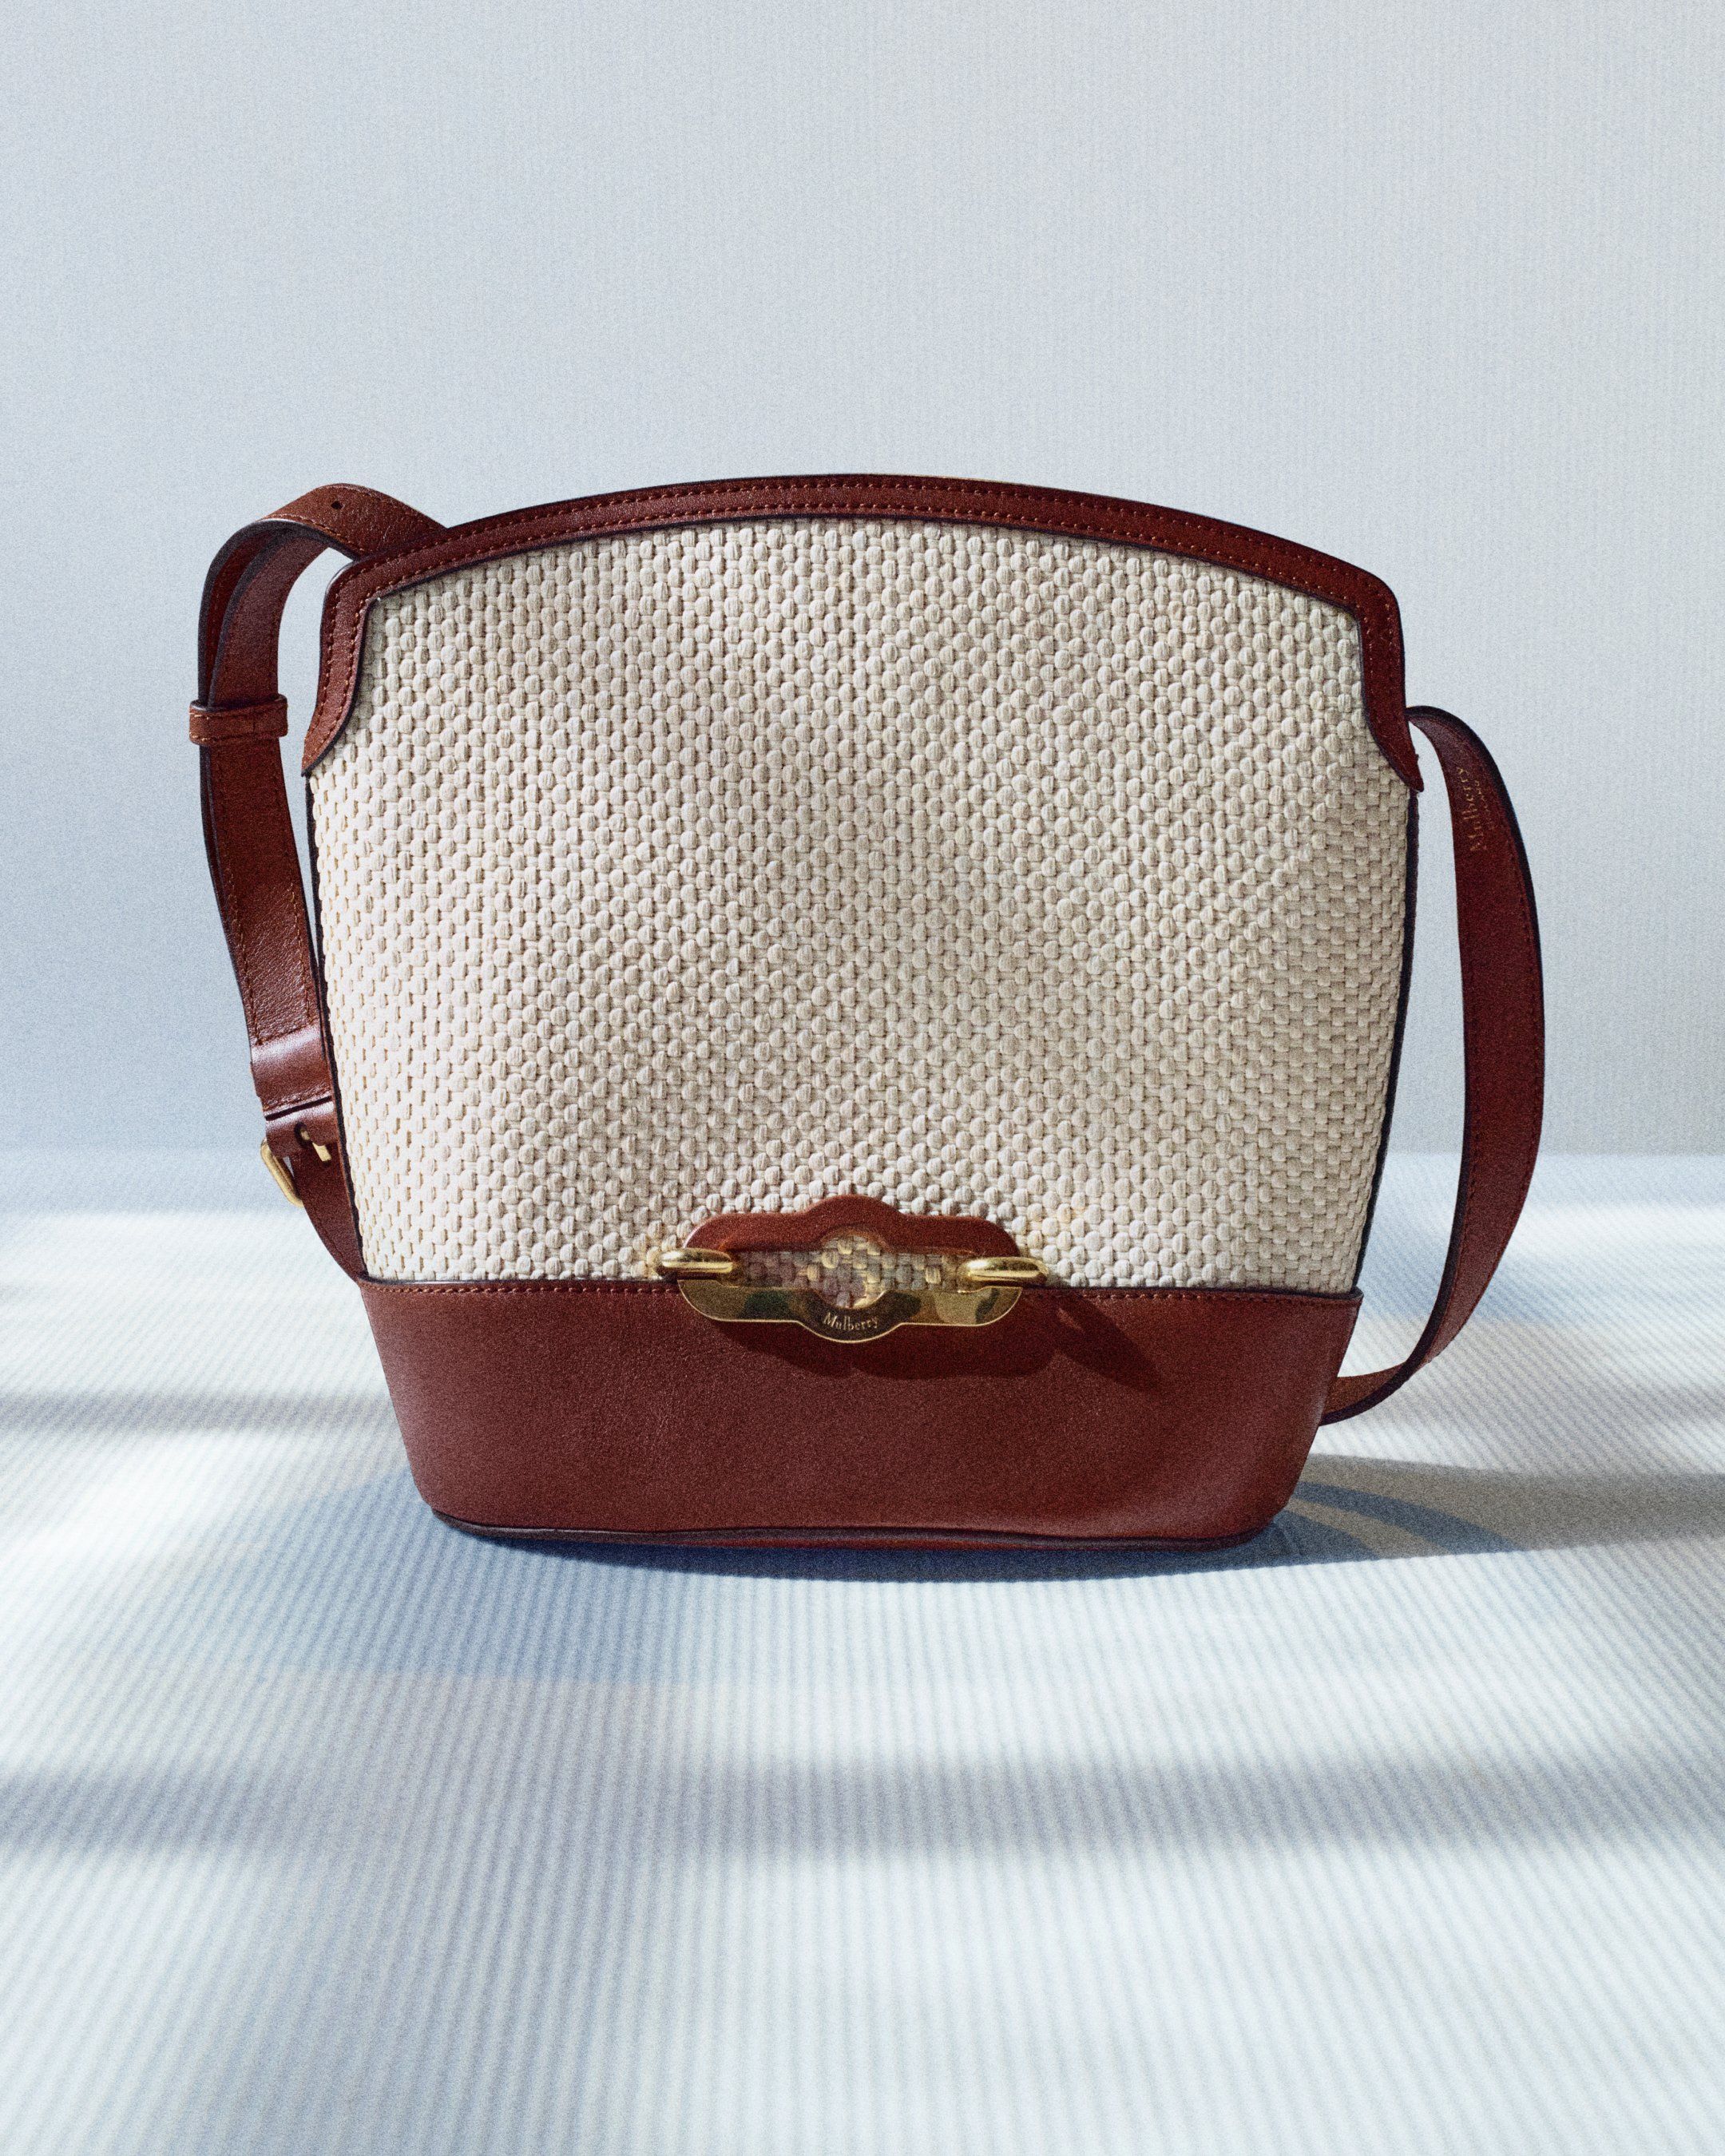 Mulberry Pimlico Bucket Bag in Raffia and brown leather